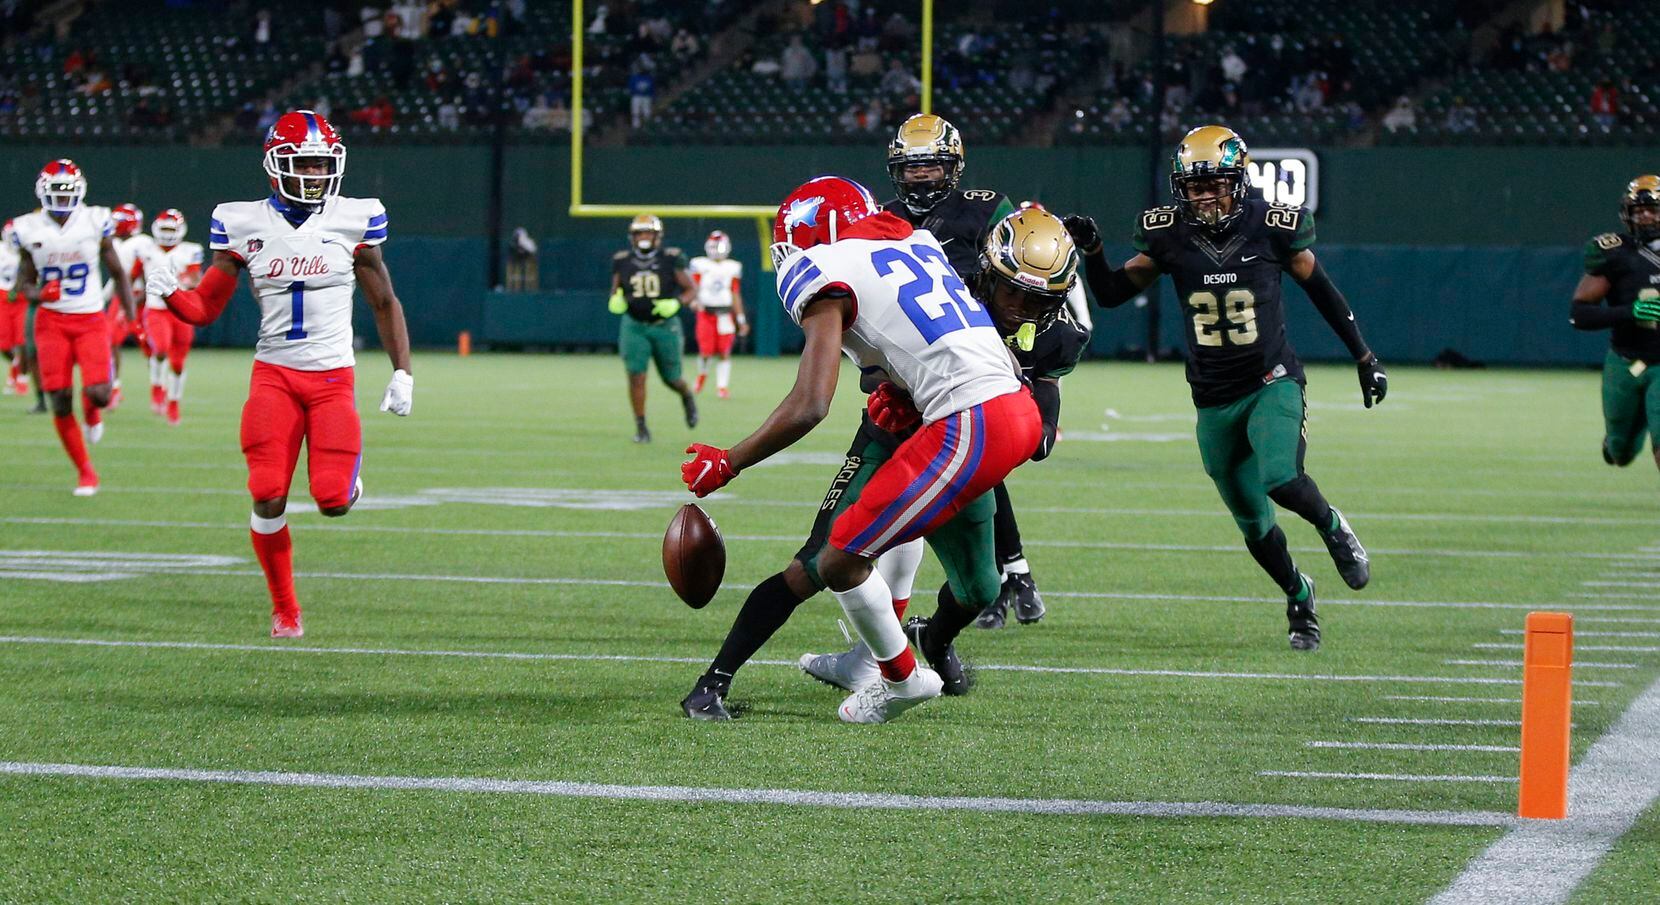 Duncanville sophomore wide receiver Lontrell Turner (22) fumbles the ball short of the end zone during the first half of a Class 6A Division I Region II final high school football game against DeSoto, Saturday, January 2, 2021. Duncanville junior running back Chris Hicks (1) would recover the ball in the end zone for the touchdown. Duncanville won 56-28. (Brandon Wade/Special Contributor)